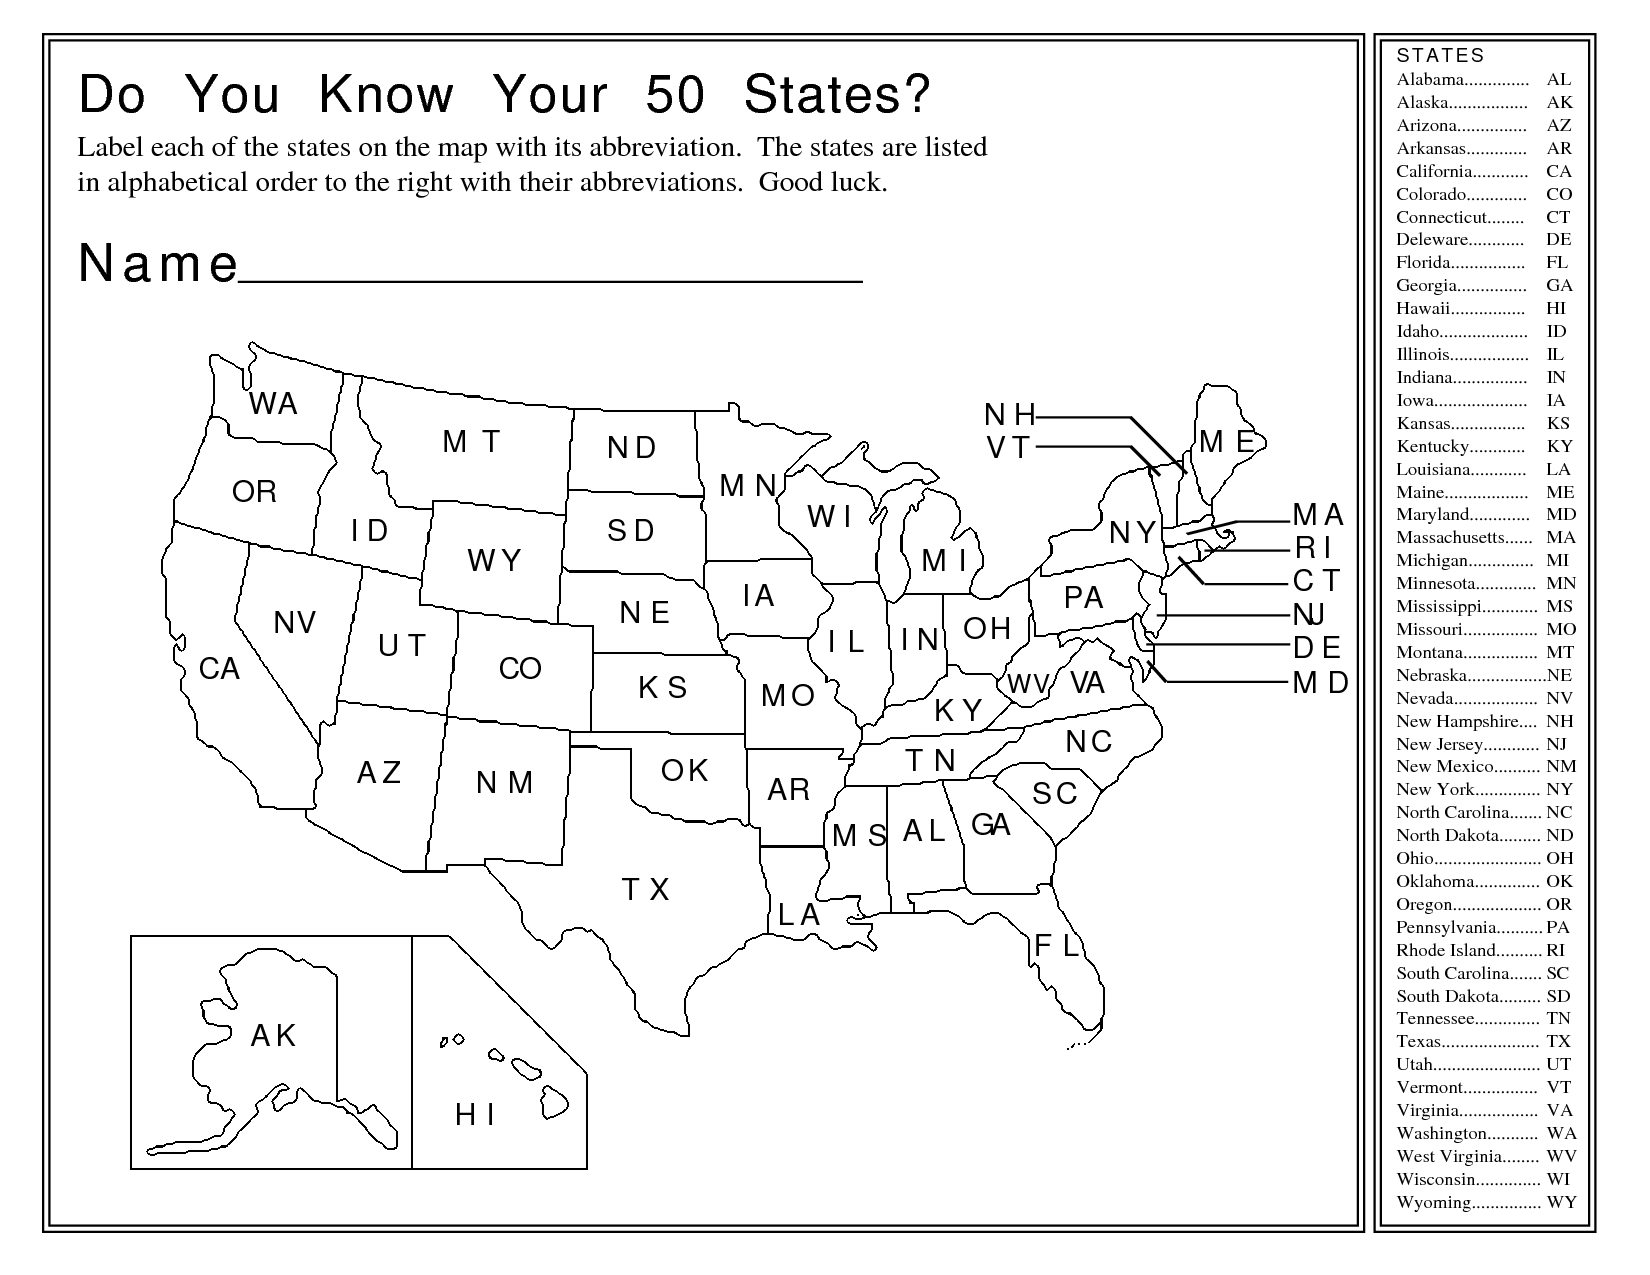 12 Best Images of Name That State Worksheet - United ...